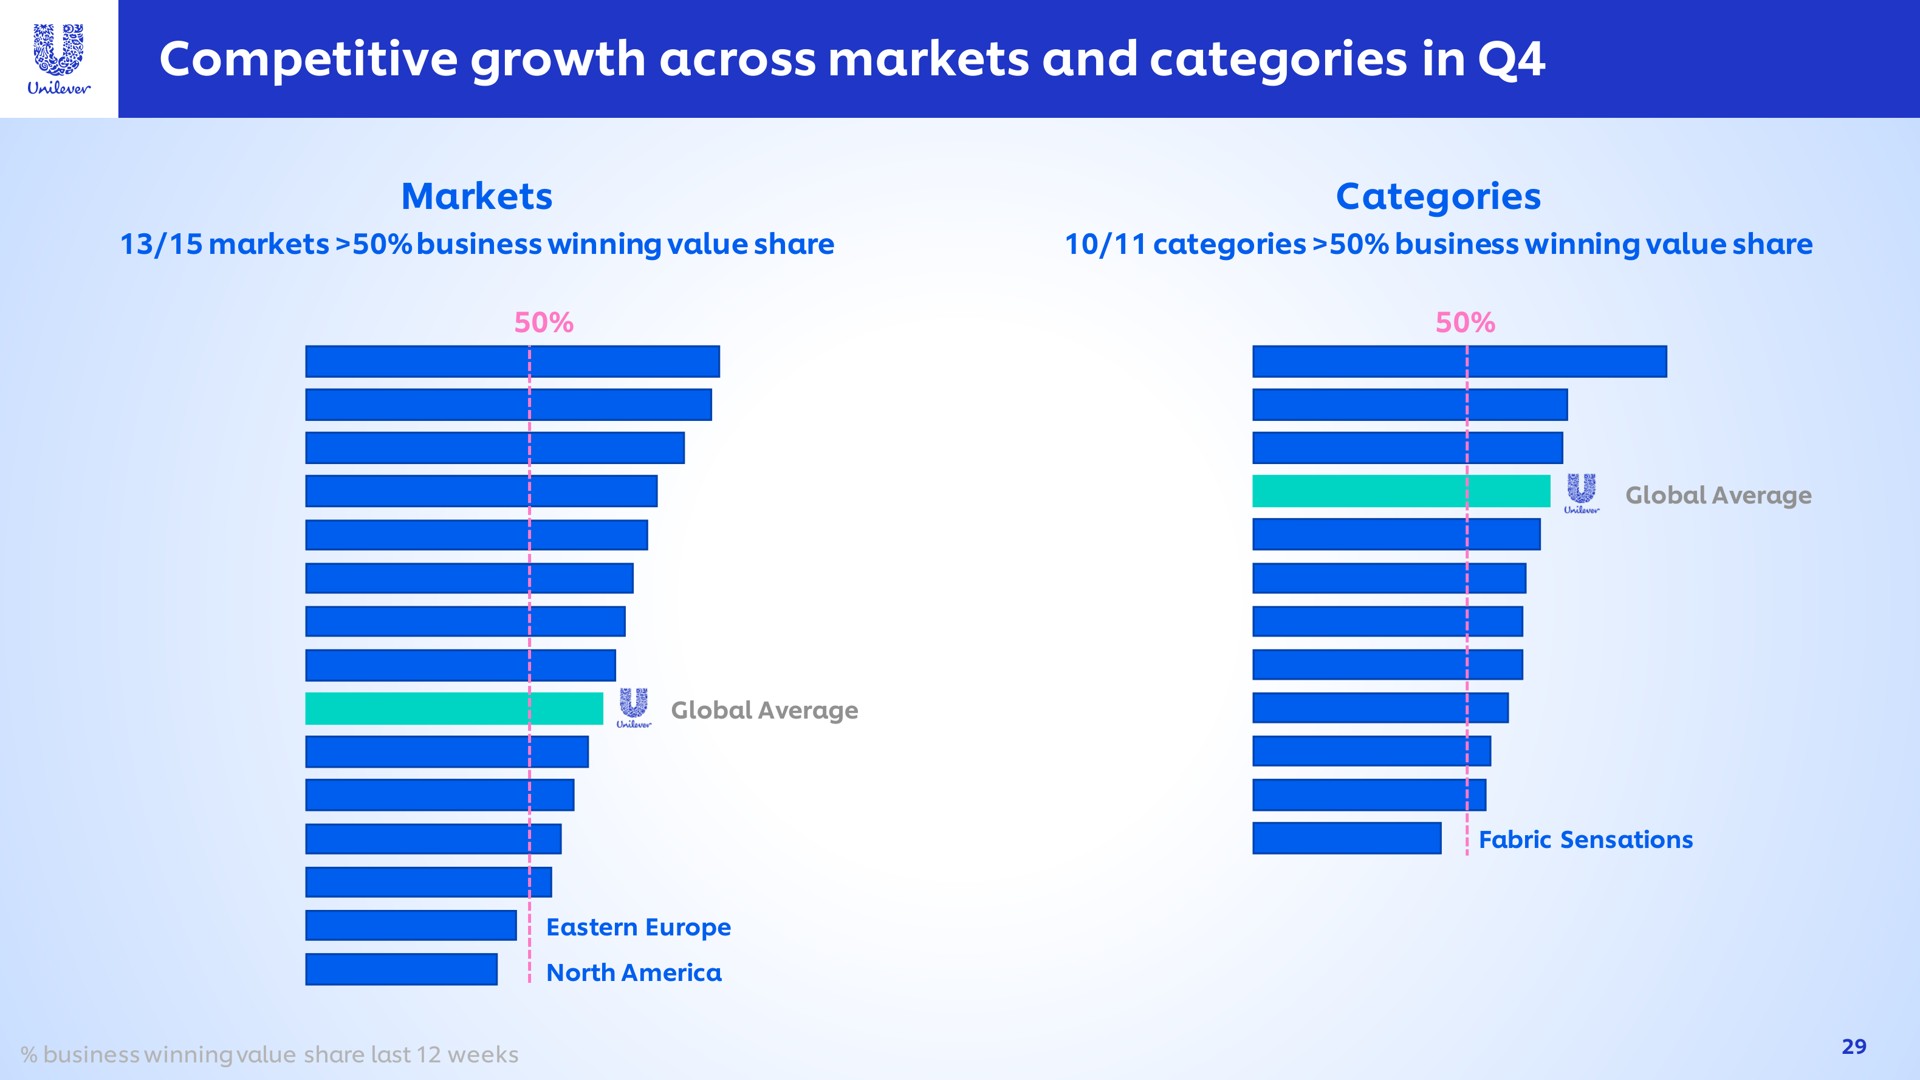 competitive growth across markets and categories in global average a as sees global average ass as i fabric sensations | Unilever